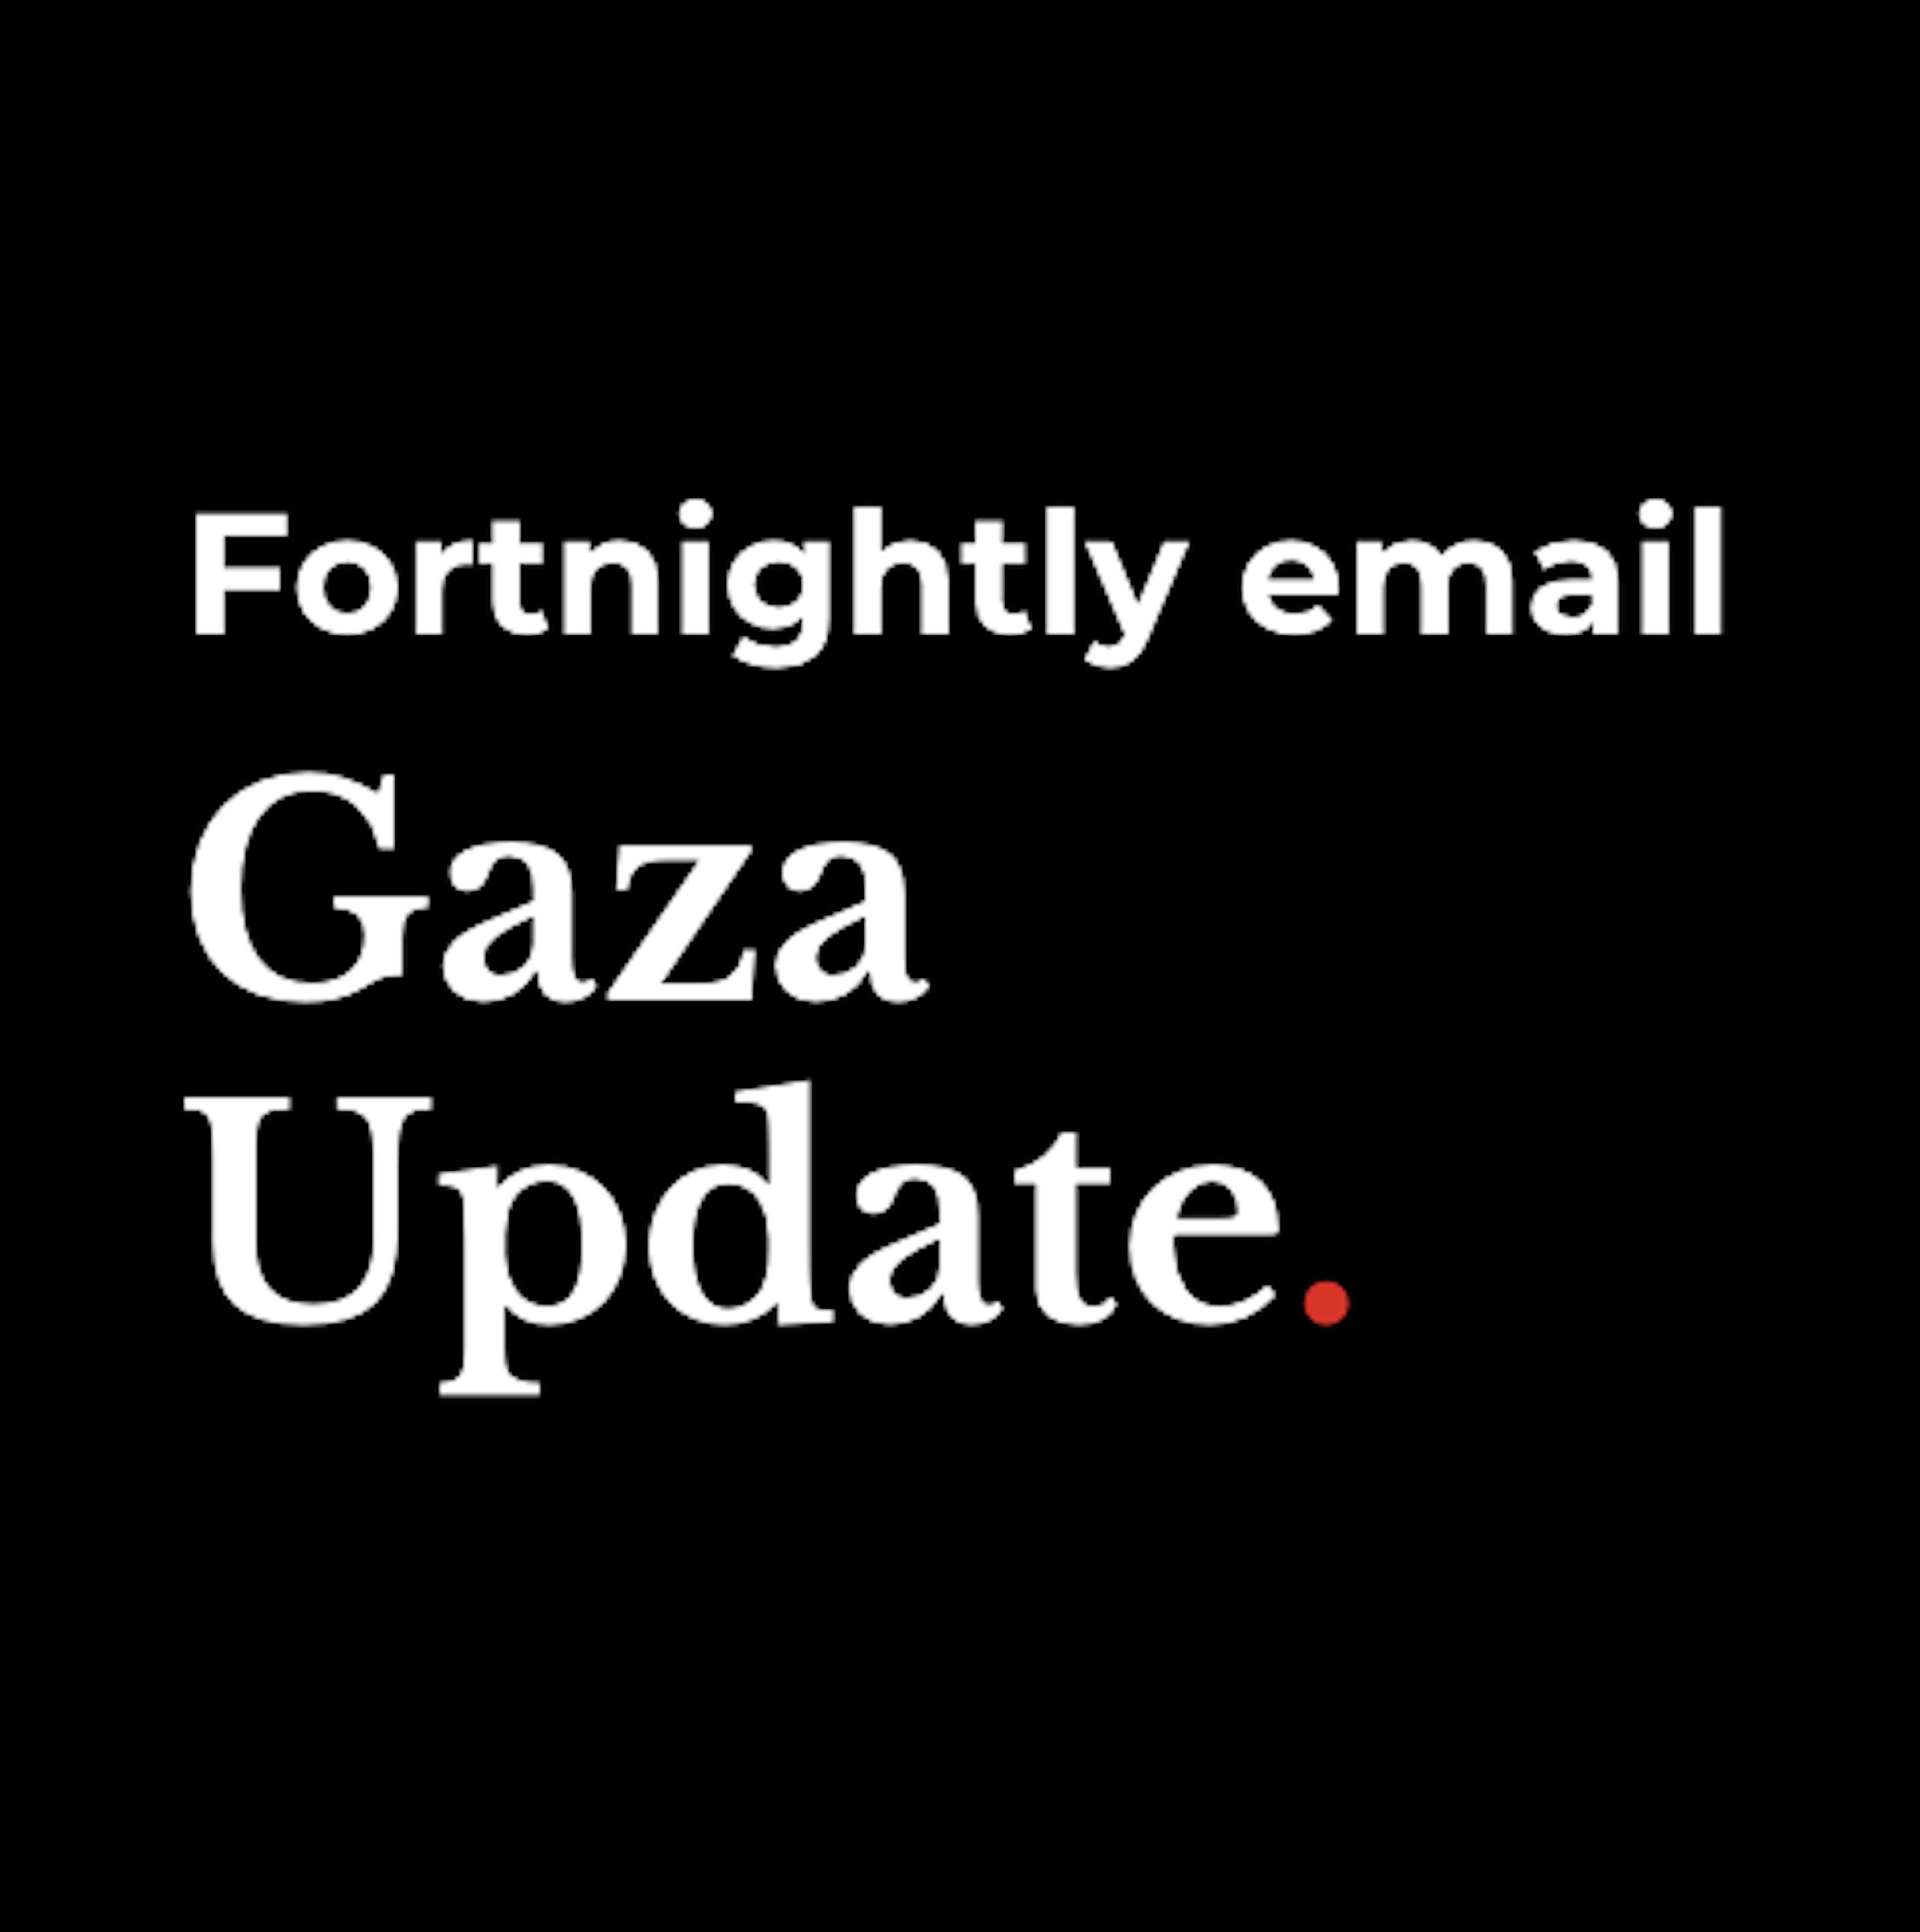 Fornightly email Gaza Update. Subscribe now